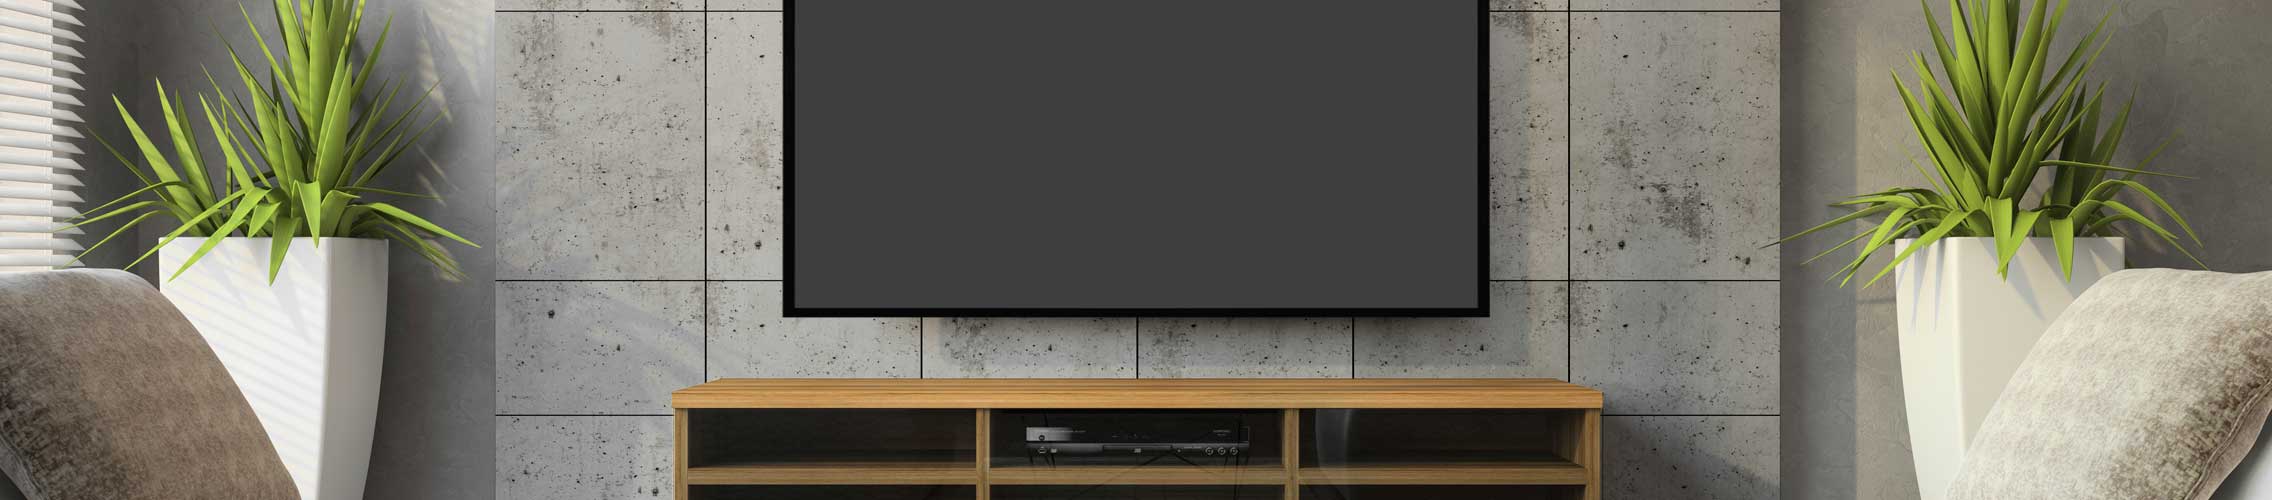 Tv Stand Buying Guide